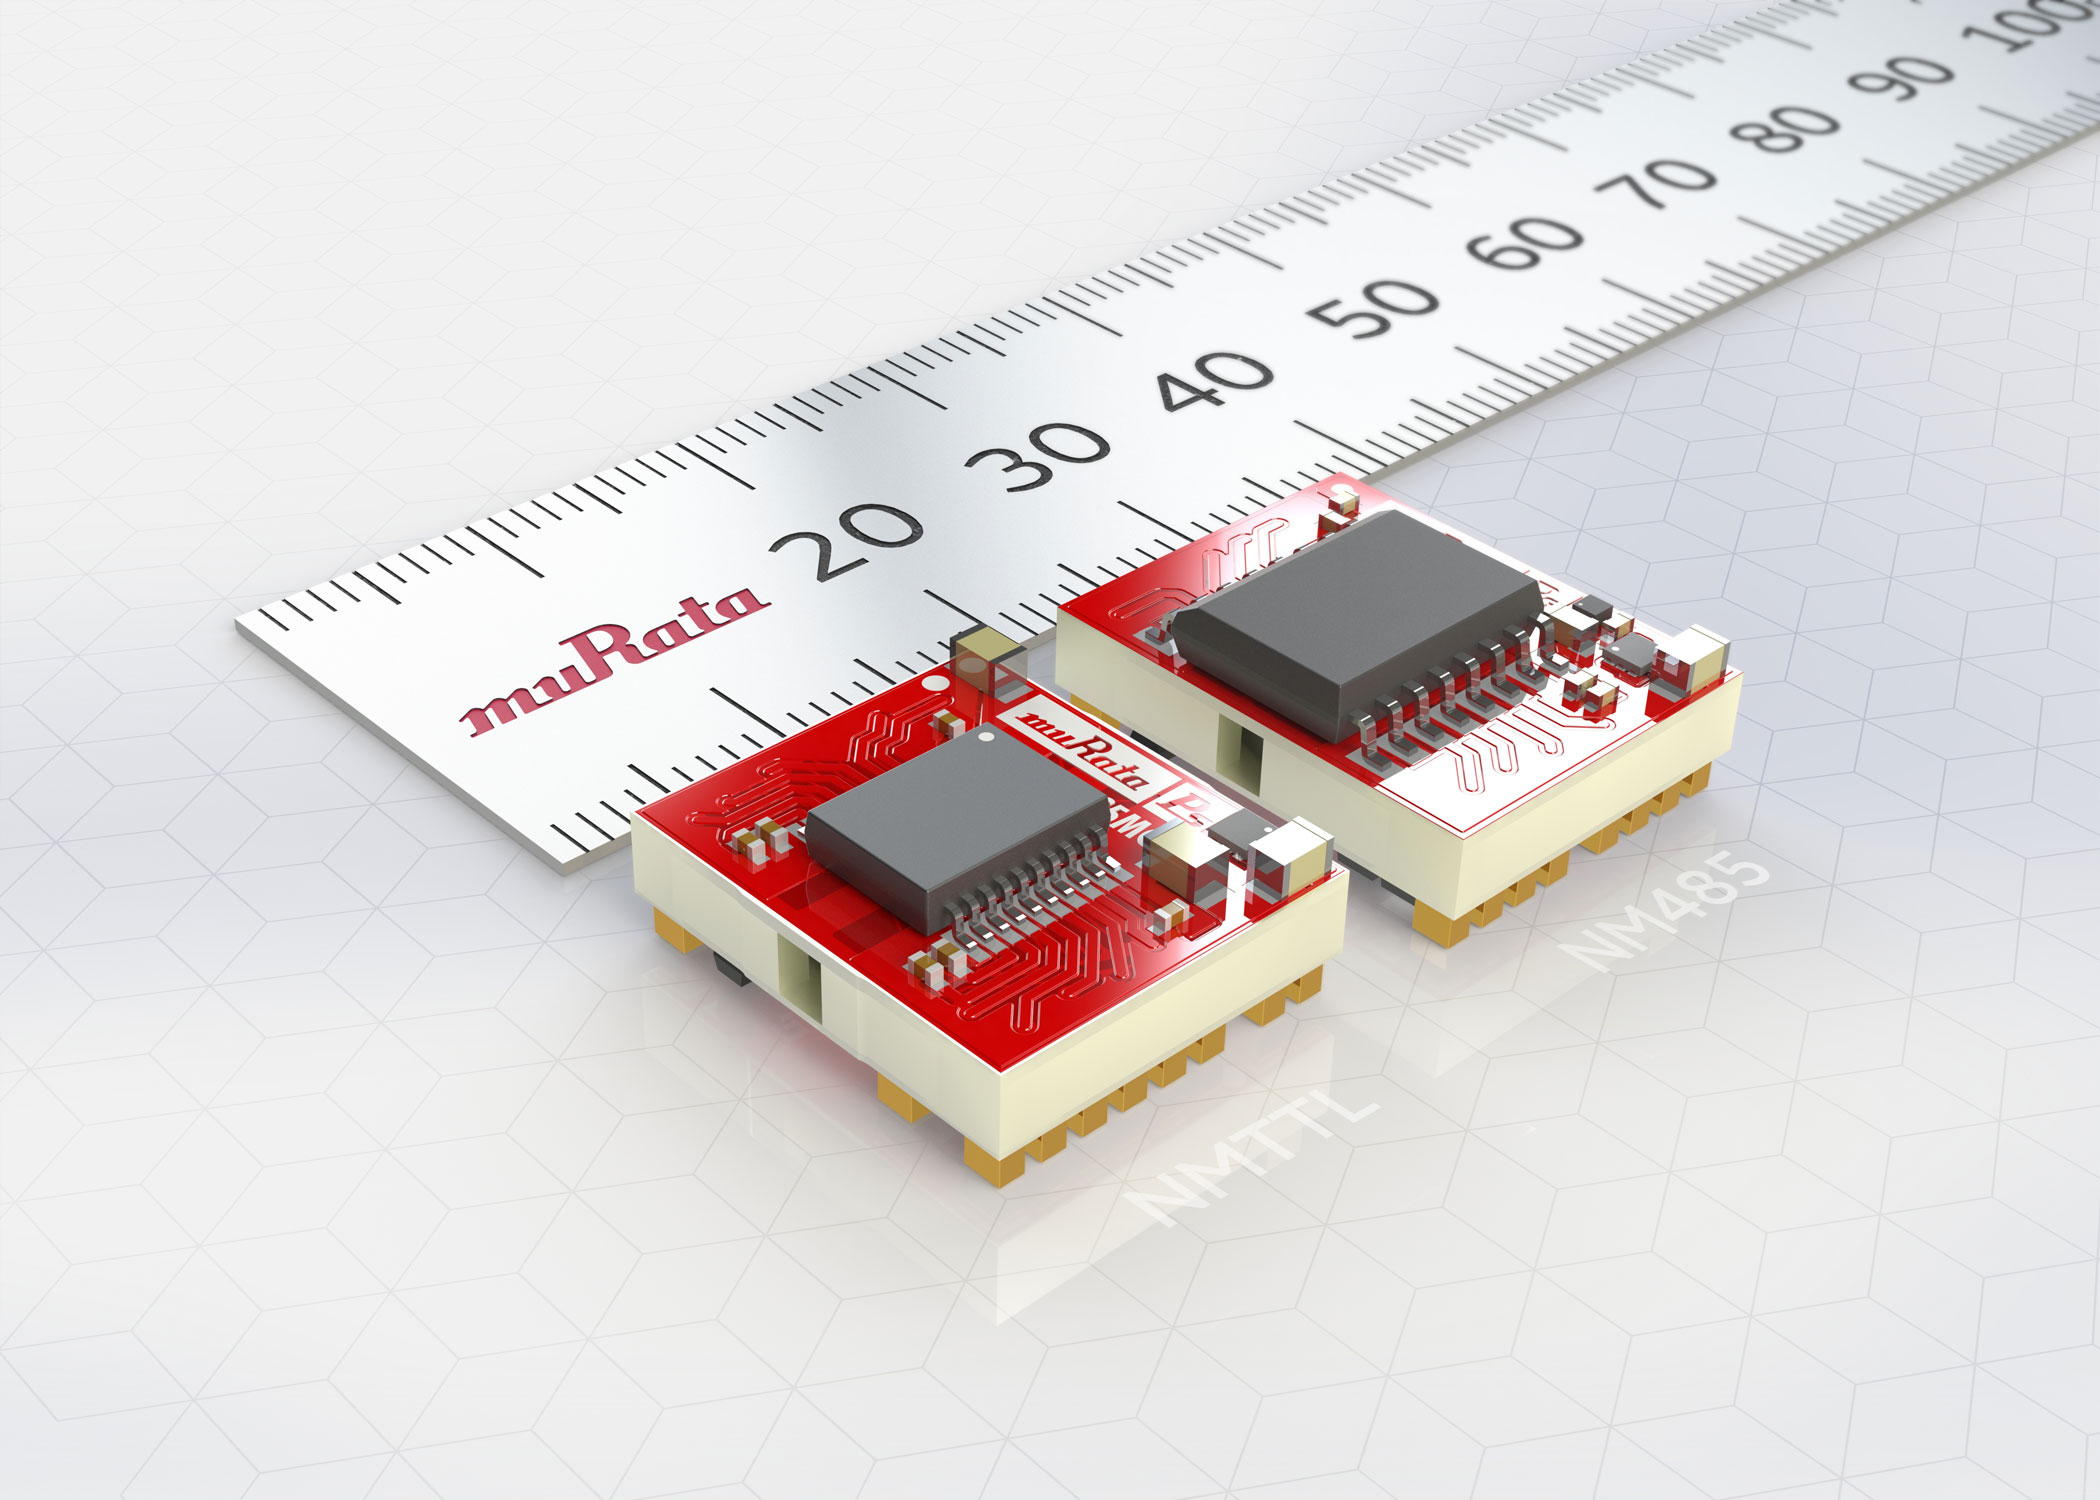 Murata’s data communication devices are isolated and include power outputs in one compact module